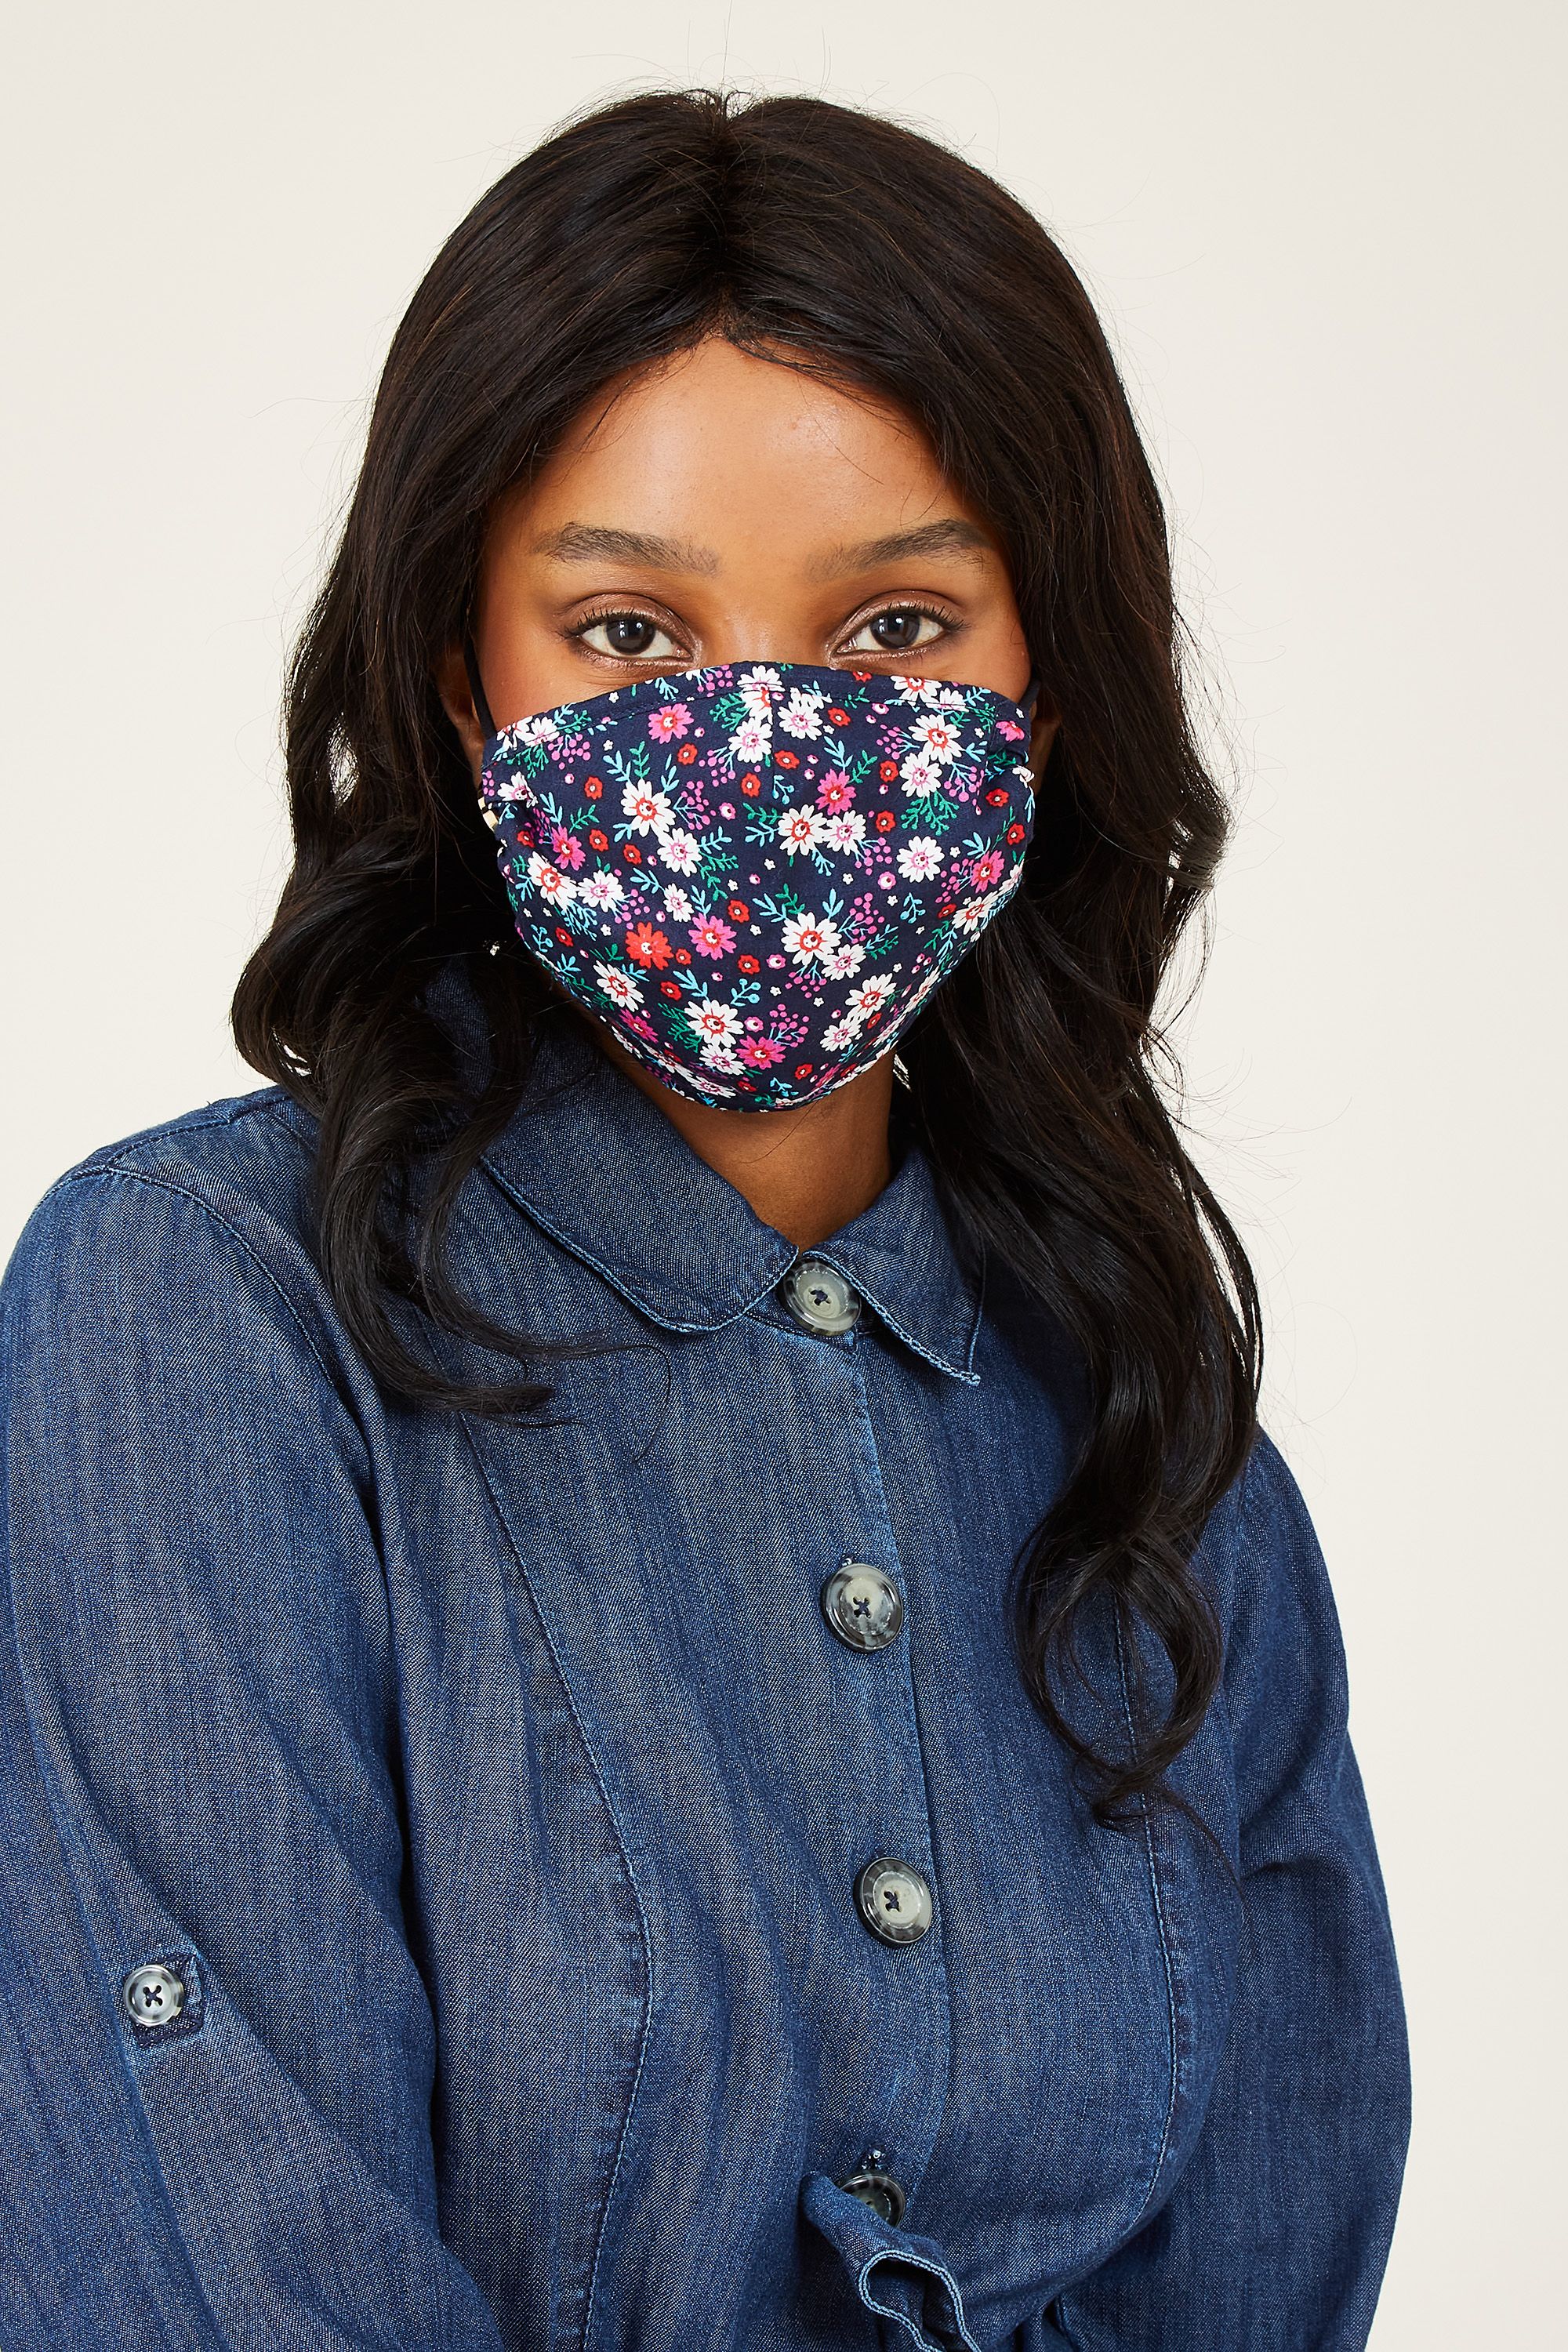 With a choice of six designs, our Floral Face Coverings 6 pack are perfect for switching up your style. Sourced from the ends of our fabric rolls, they are cut from soft cotton to keep you comfortable on every journey. Please remember these are non-medical masks and not PPE. Wash your hands before and after putting on the covering. One Poundfrom each covering is donated to Sufra, a charity that supports and provides food for people in extreme poverty.